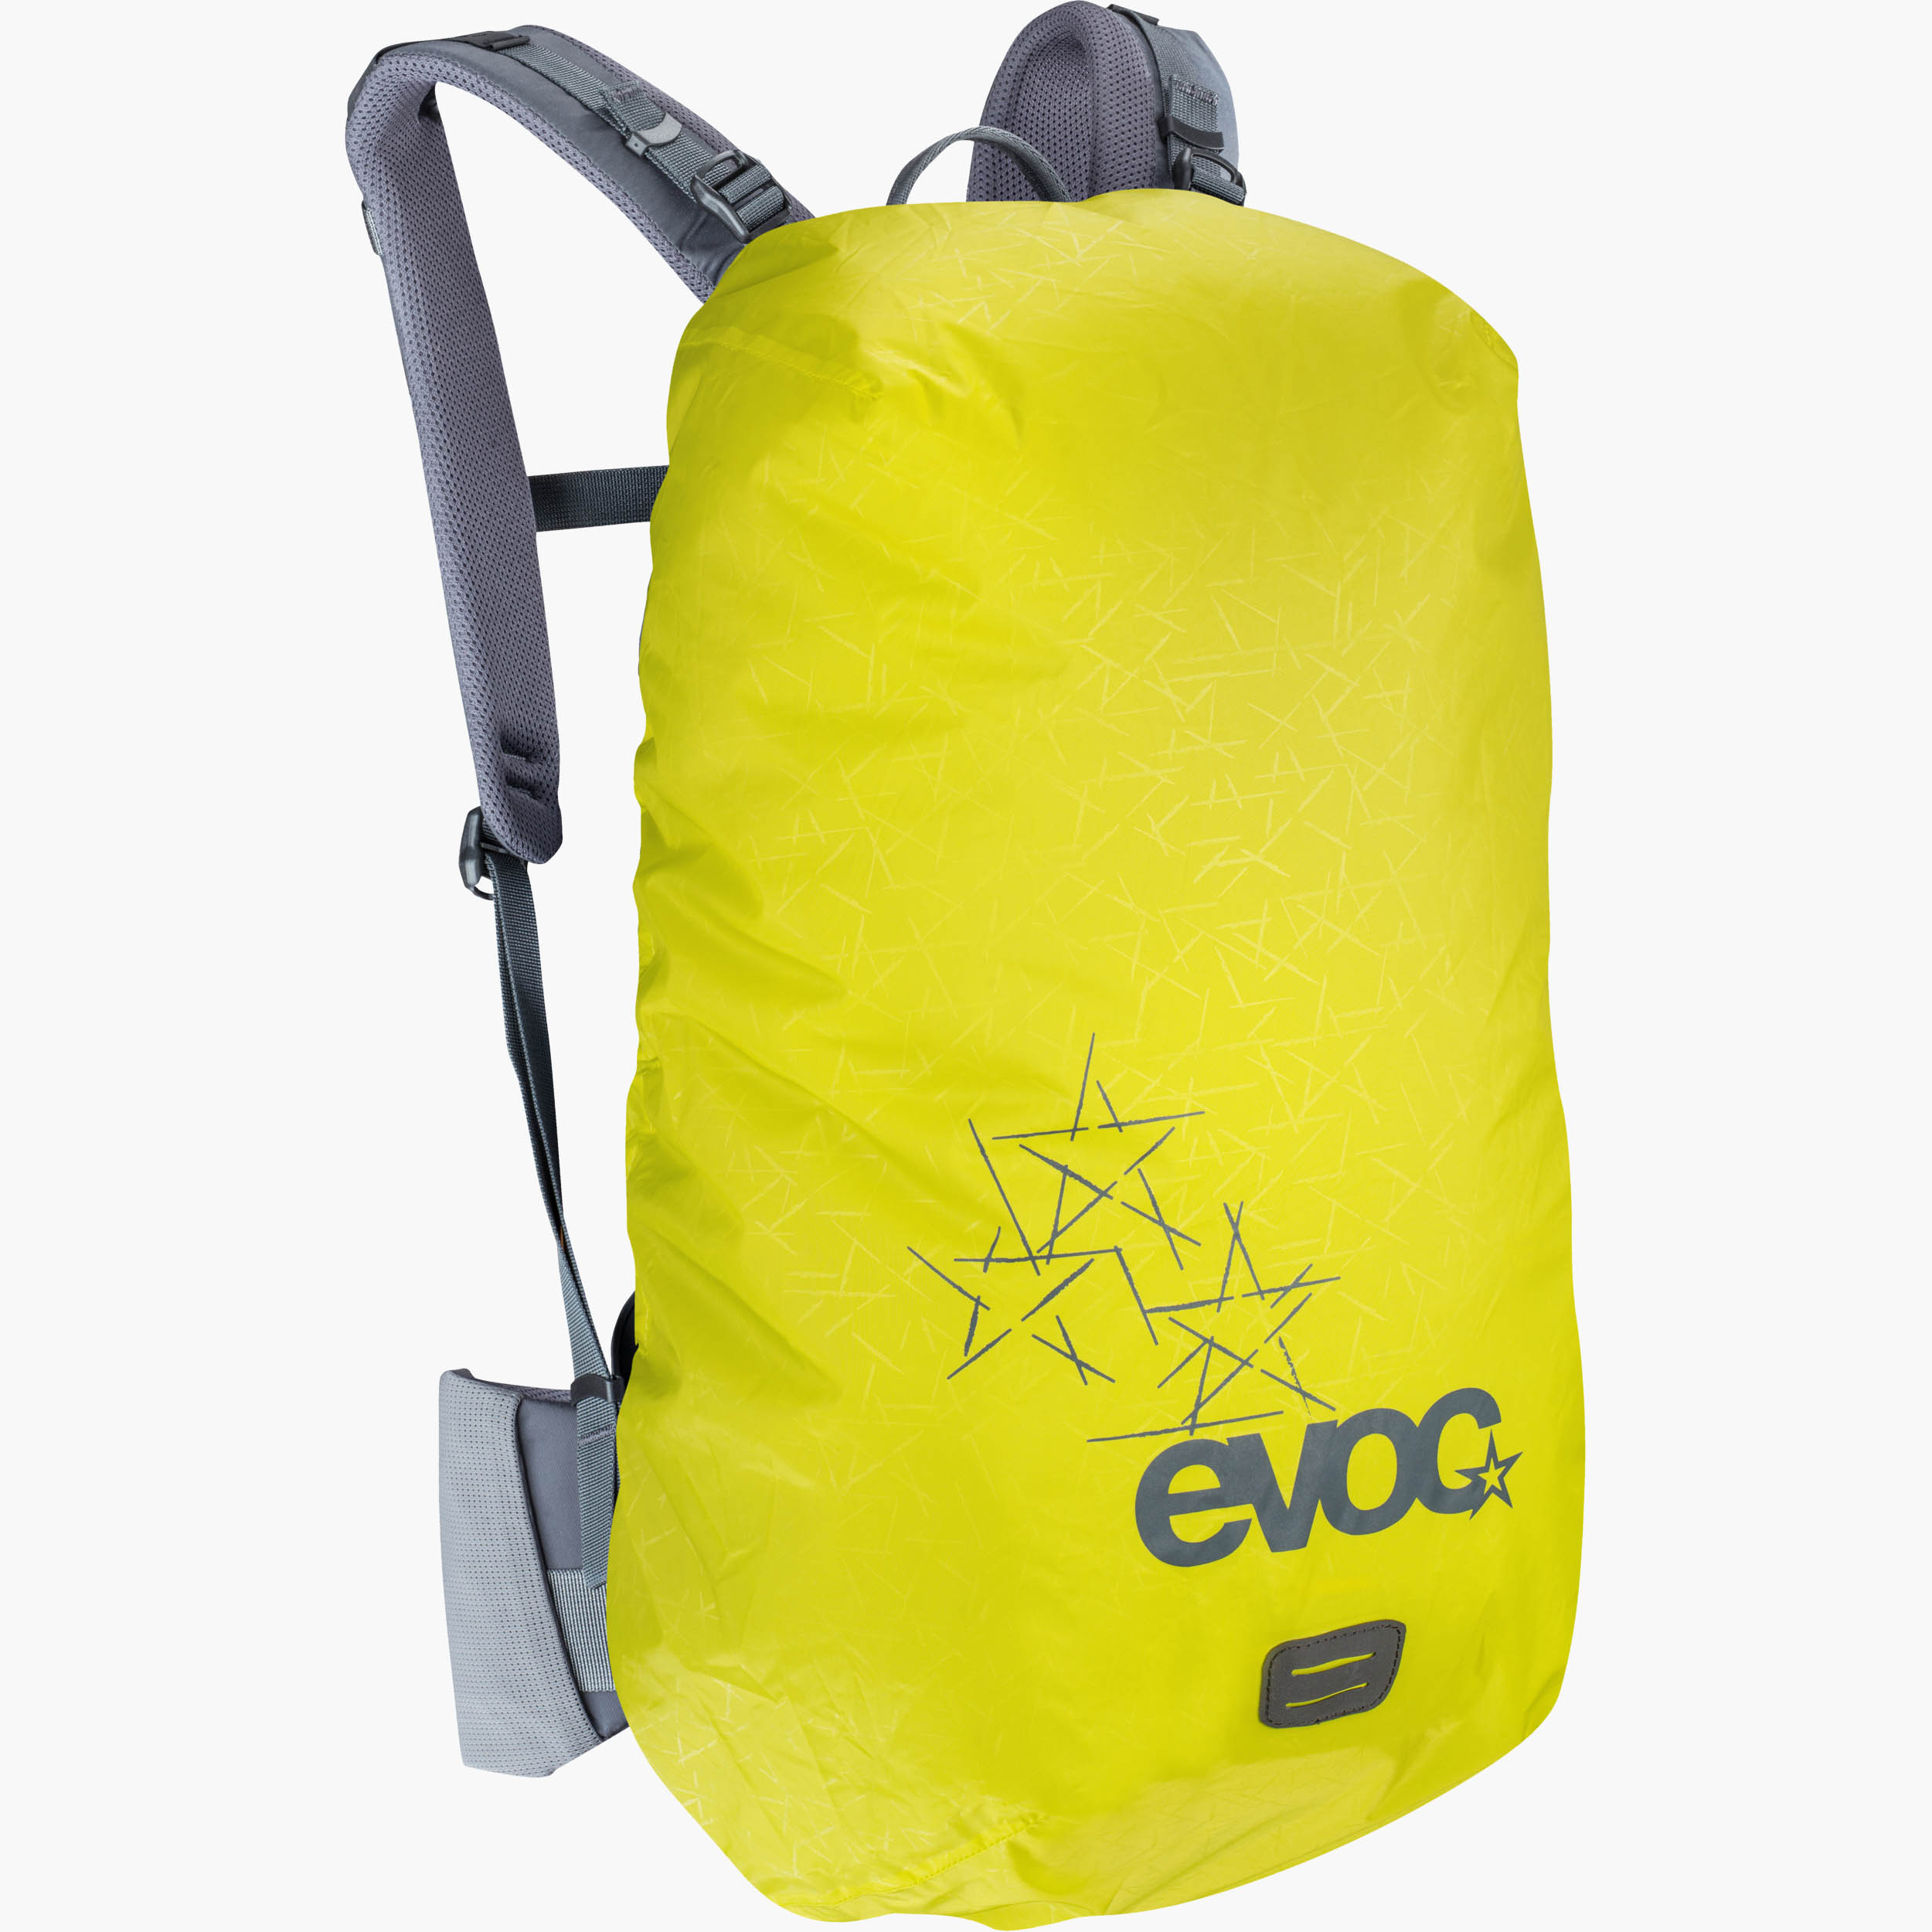 Evoc Rain Cover Protection Backpack Accessories Raincover Mud Guard Sleeve 